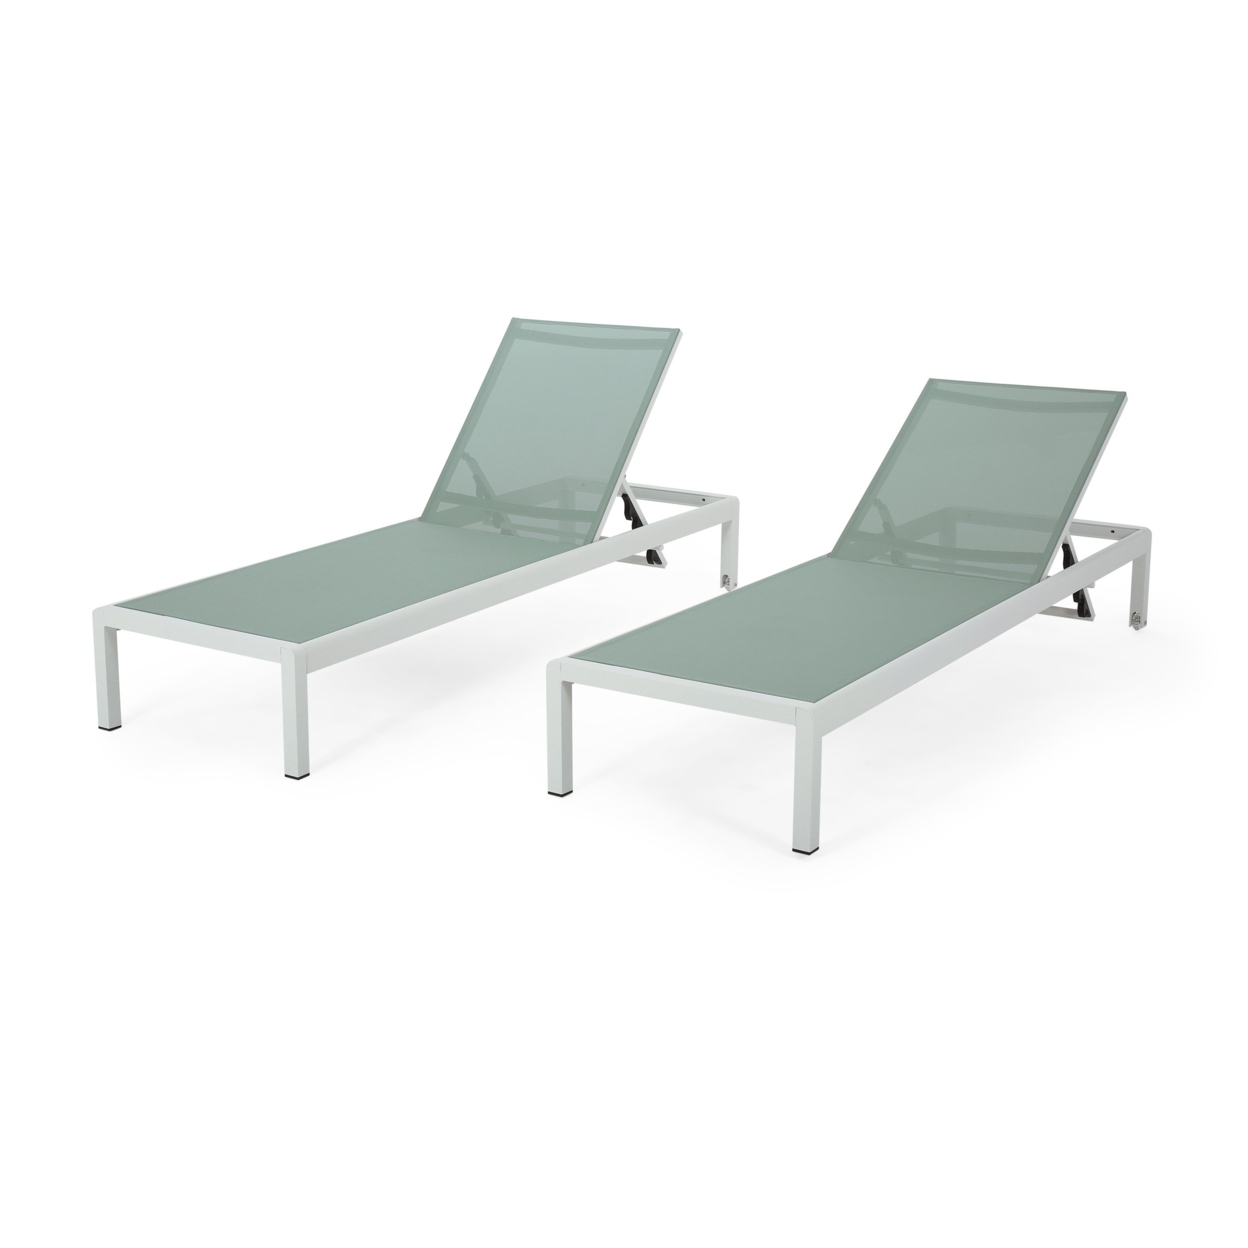 Cherie Outdoor Chaise Lounges (Set Of 2) - Green/white